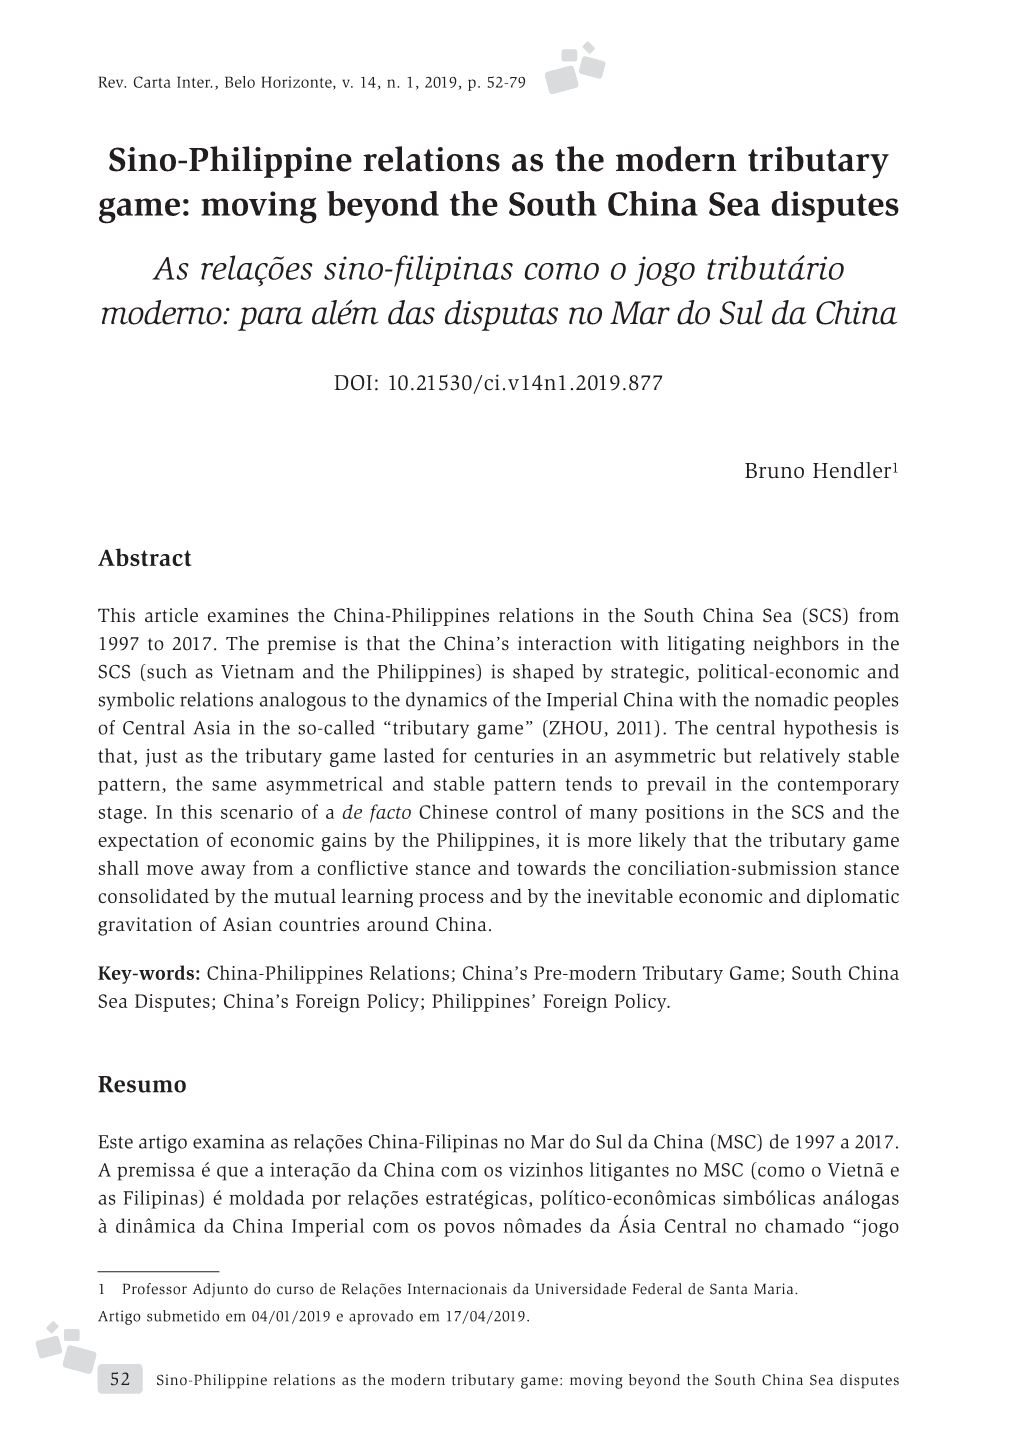 Sino-Philippine Relations As the Modern Tributary Game: Moving